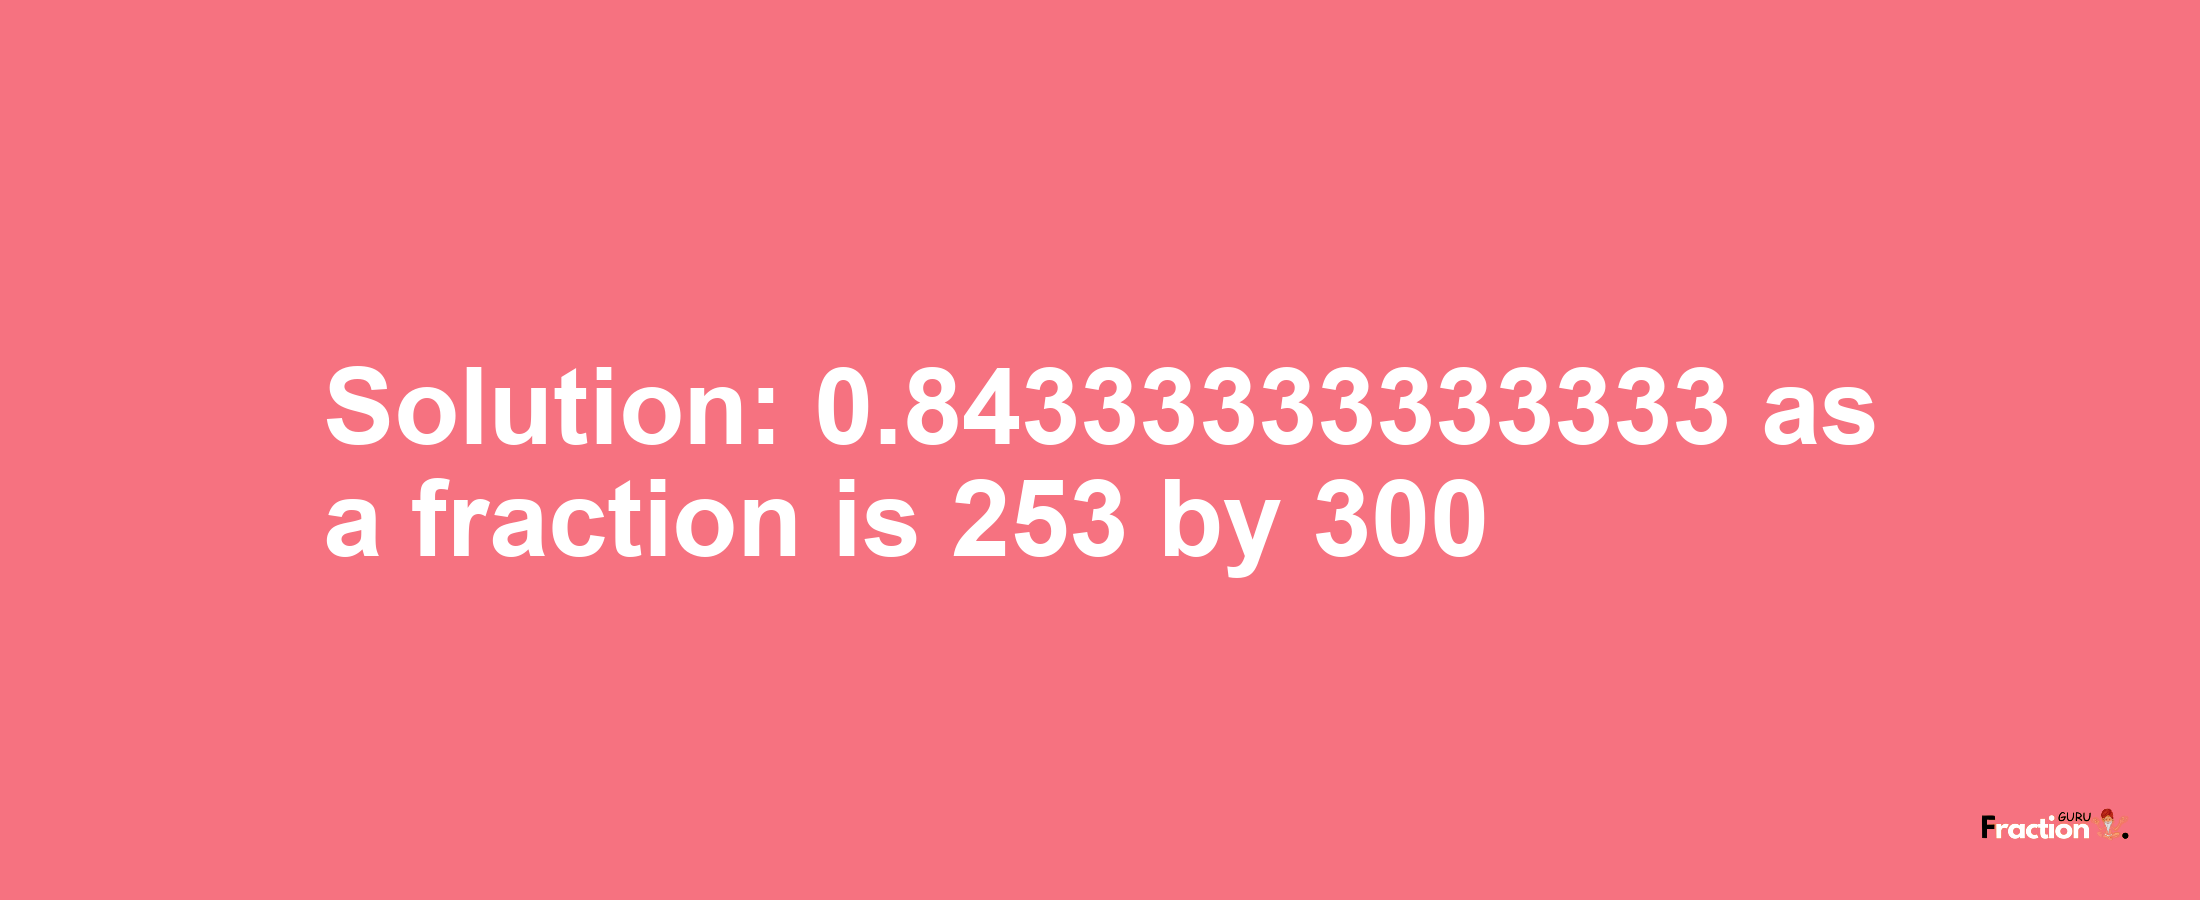 Solution:0.84333333333333 as a fraction is 253/300